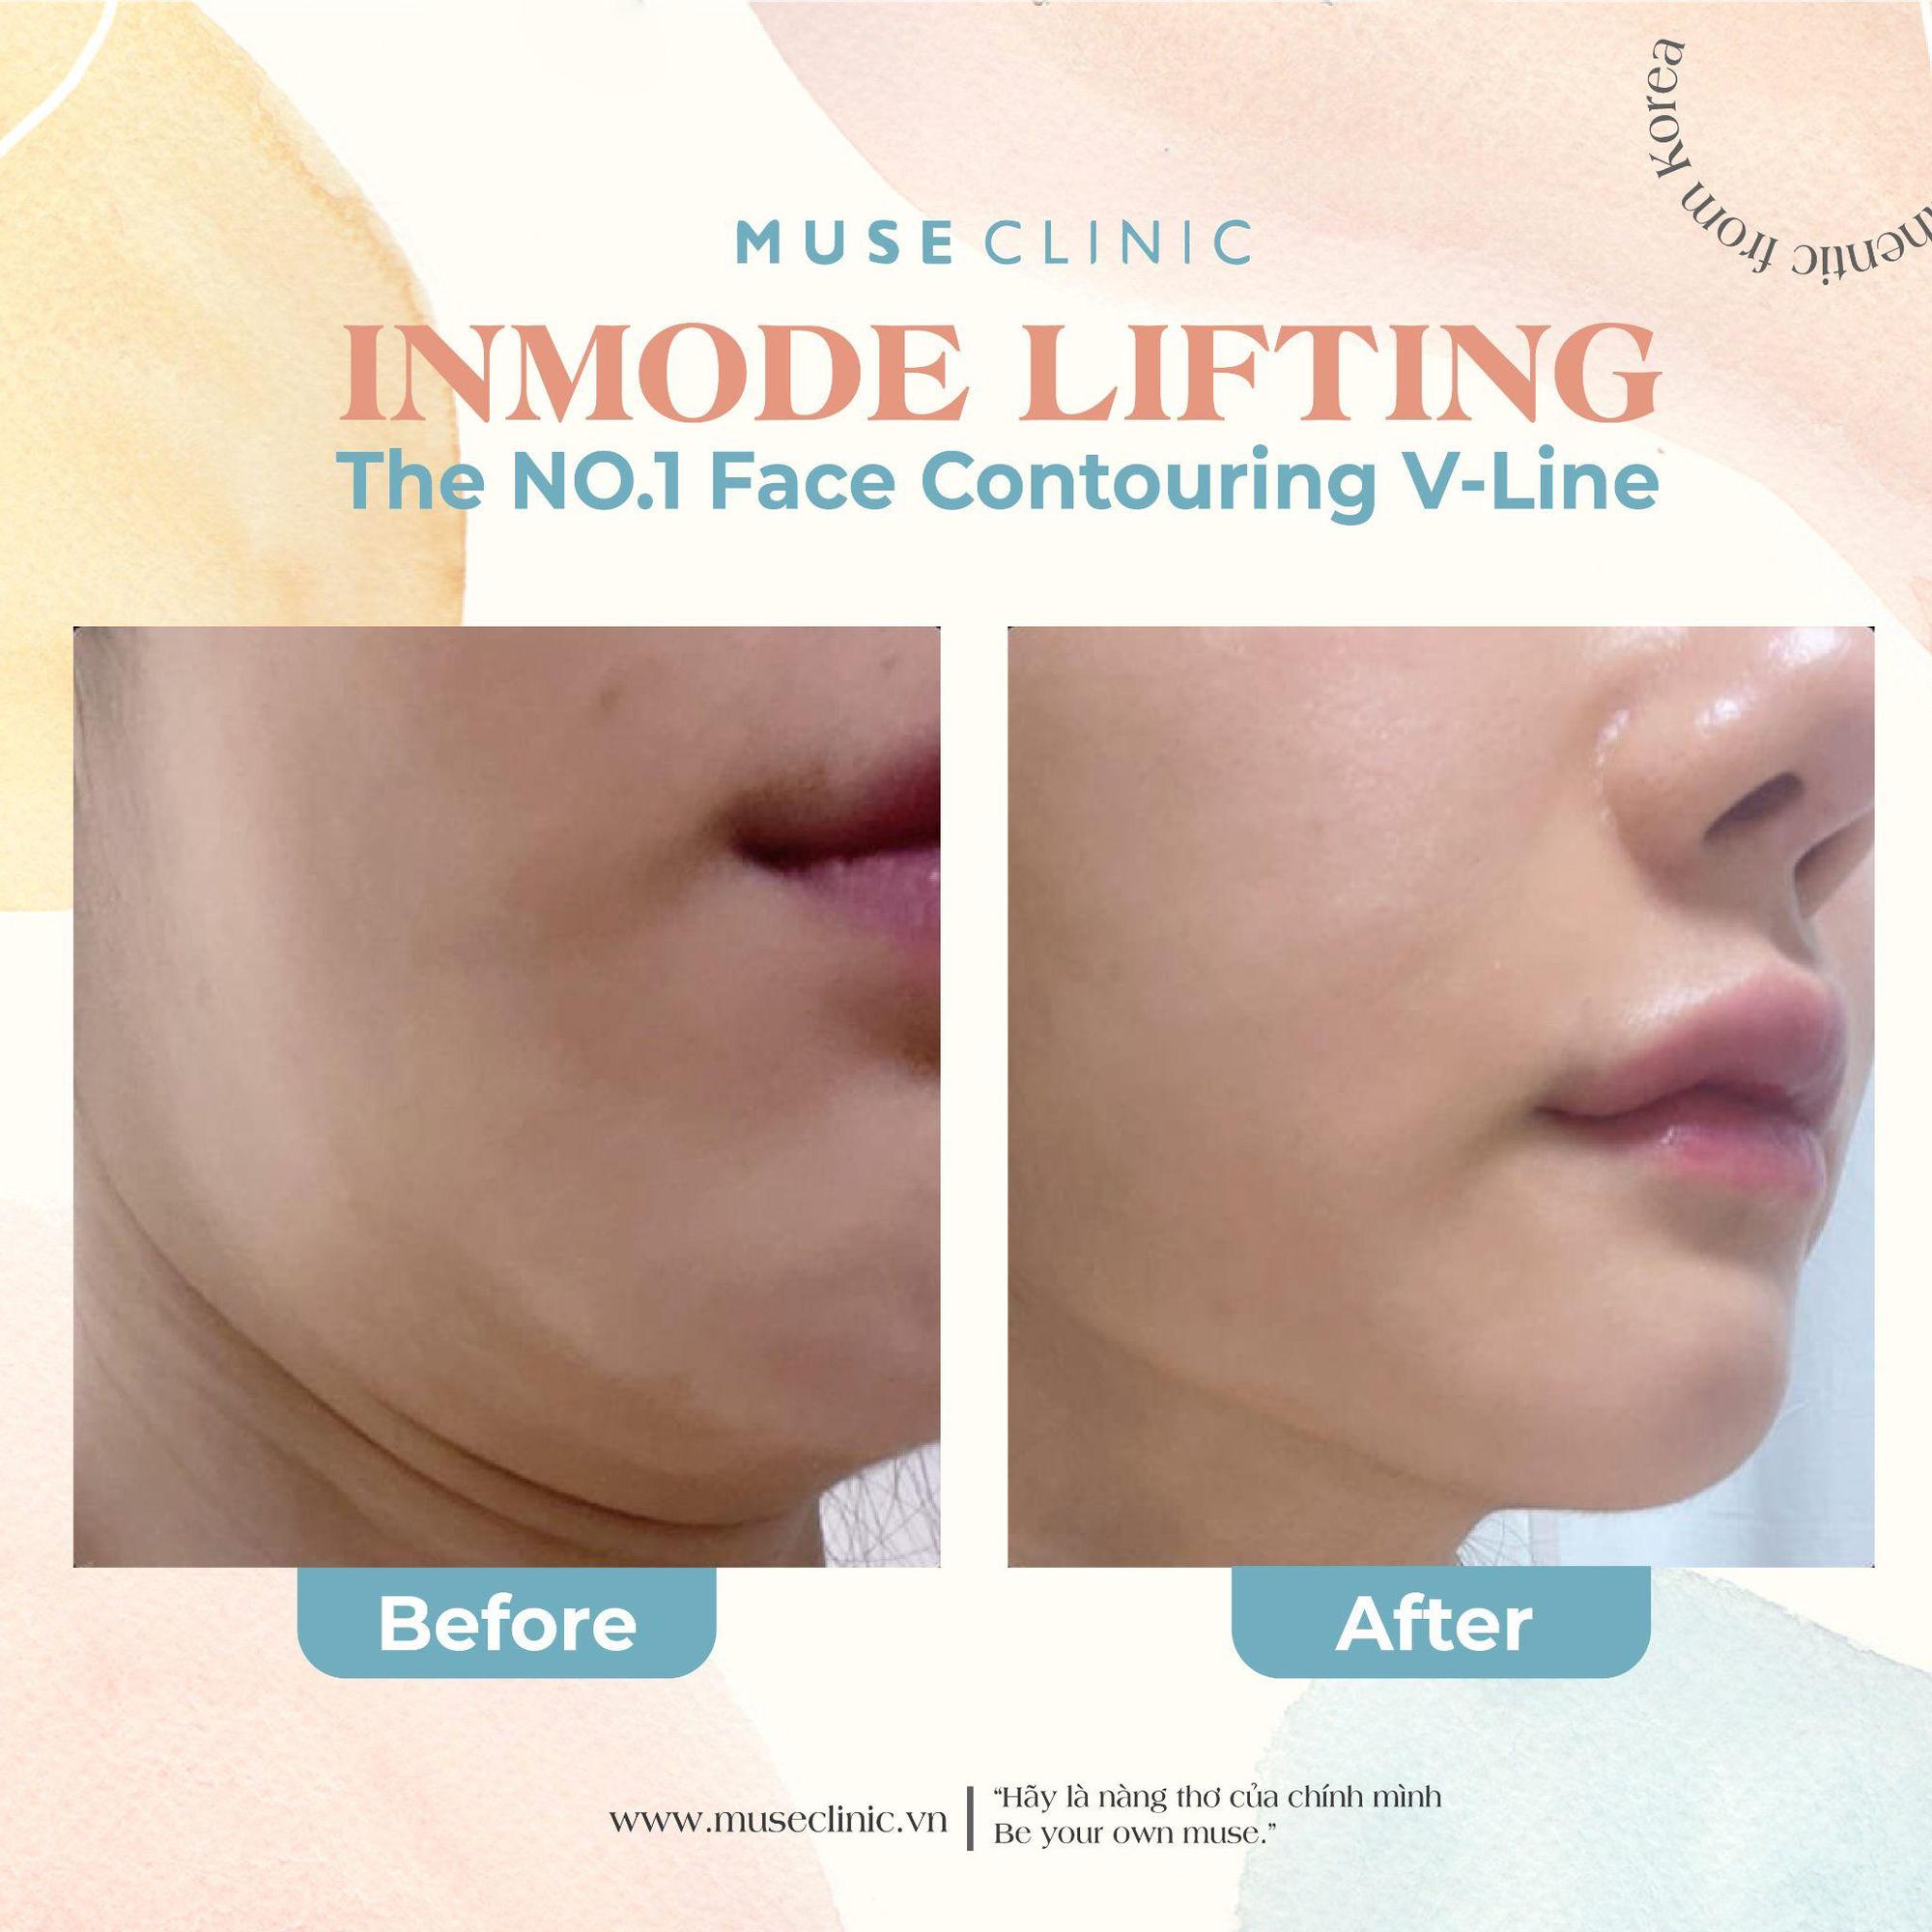 Top 3 Korean V-Line shaping procedures with Muse Clinic - Photo 3.